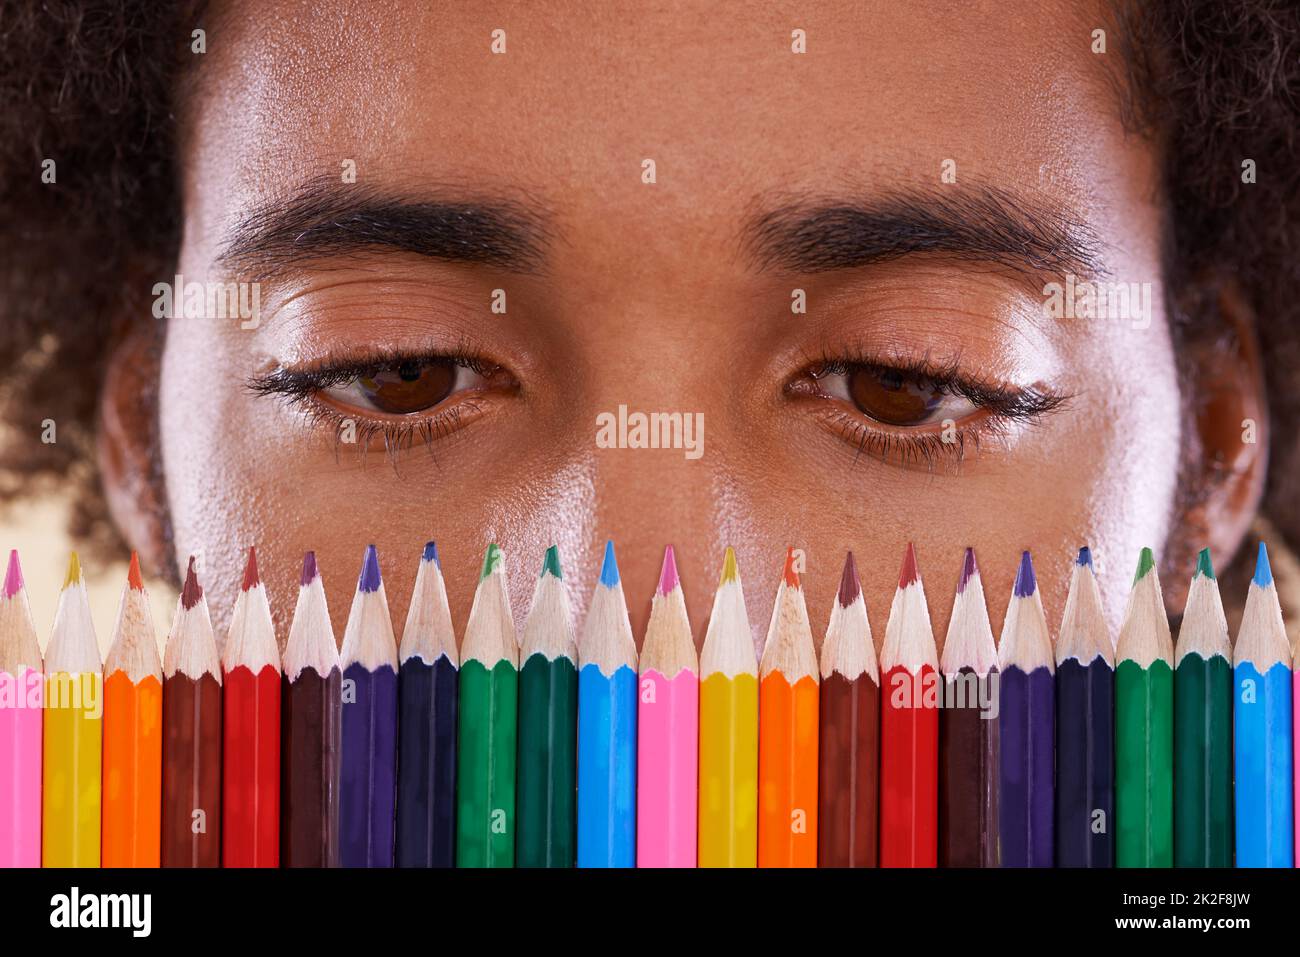 Hmm, so many colors.... Cropped view of an african man looking closely at a row of colorful pencil crayons. Stock Photo